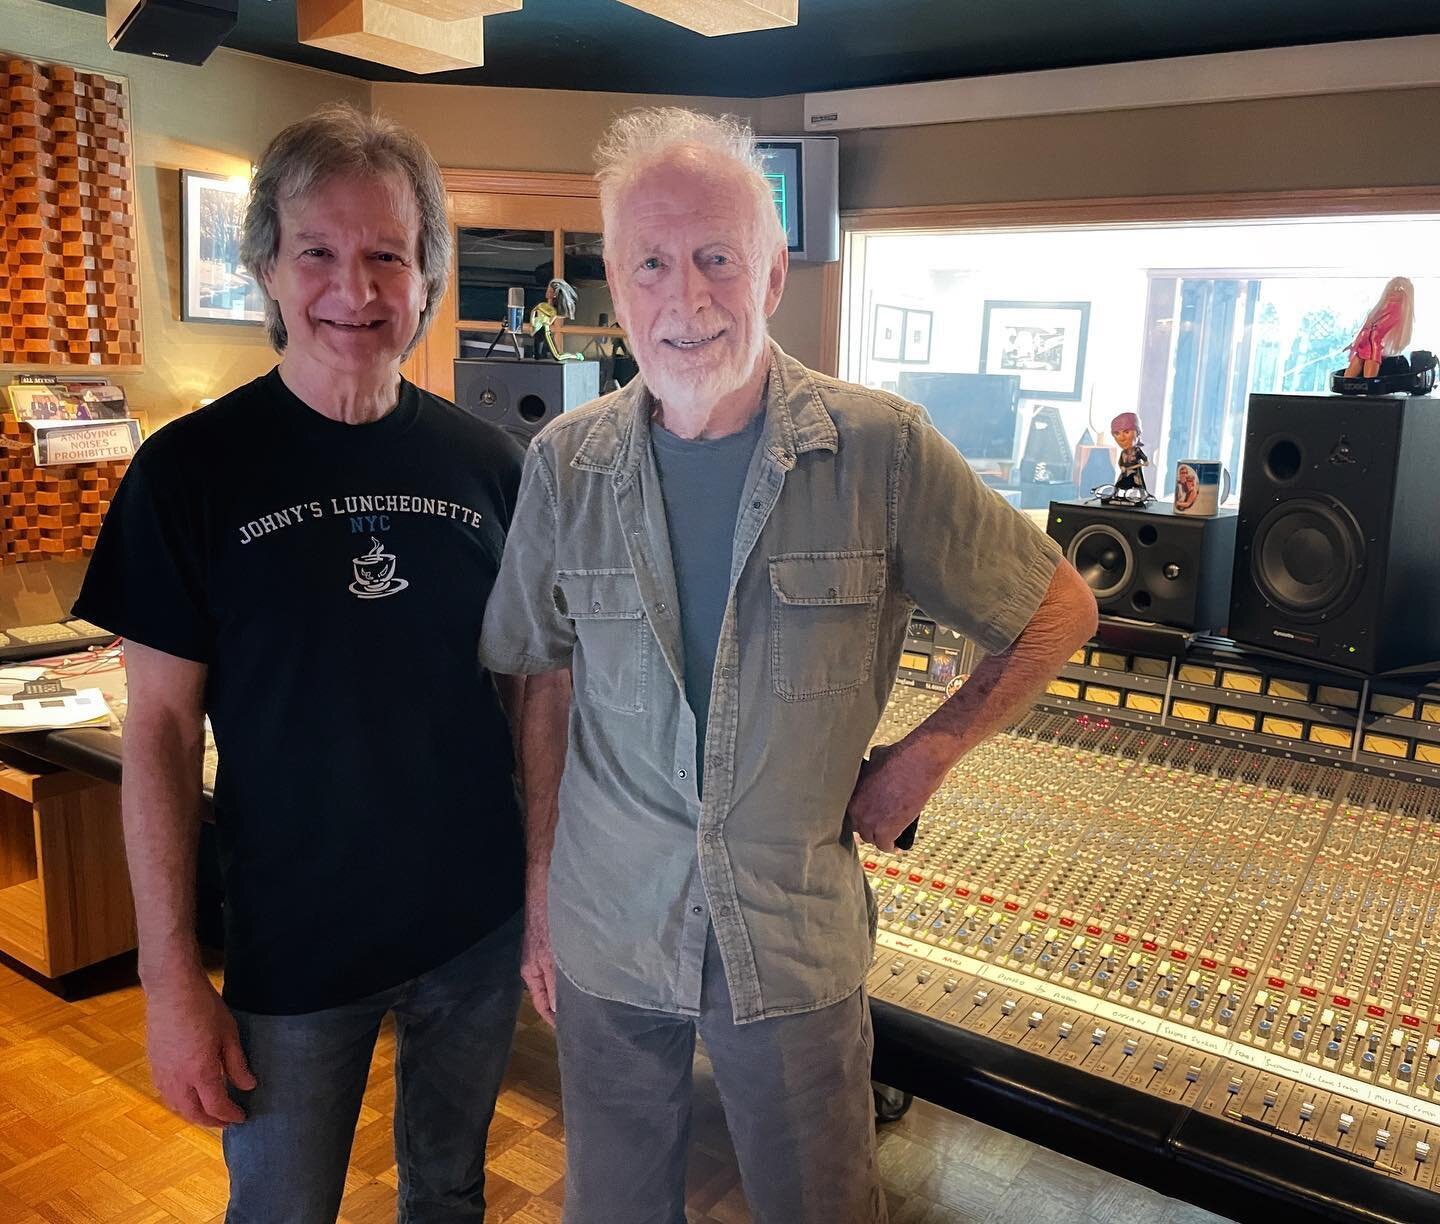 So cool hanging with Chris Blackwell in the studio today listening to some 5.1 Marley mixes. What a legend! So cool to finally meet in person after so many years. Looking forward to future collaborations 🎶